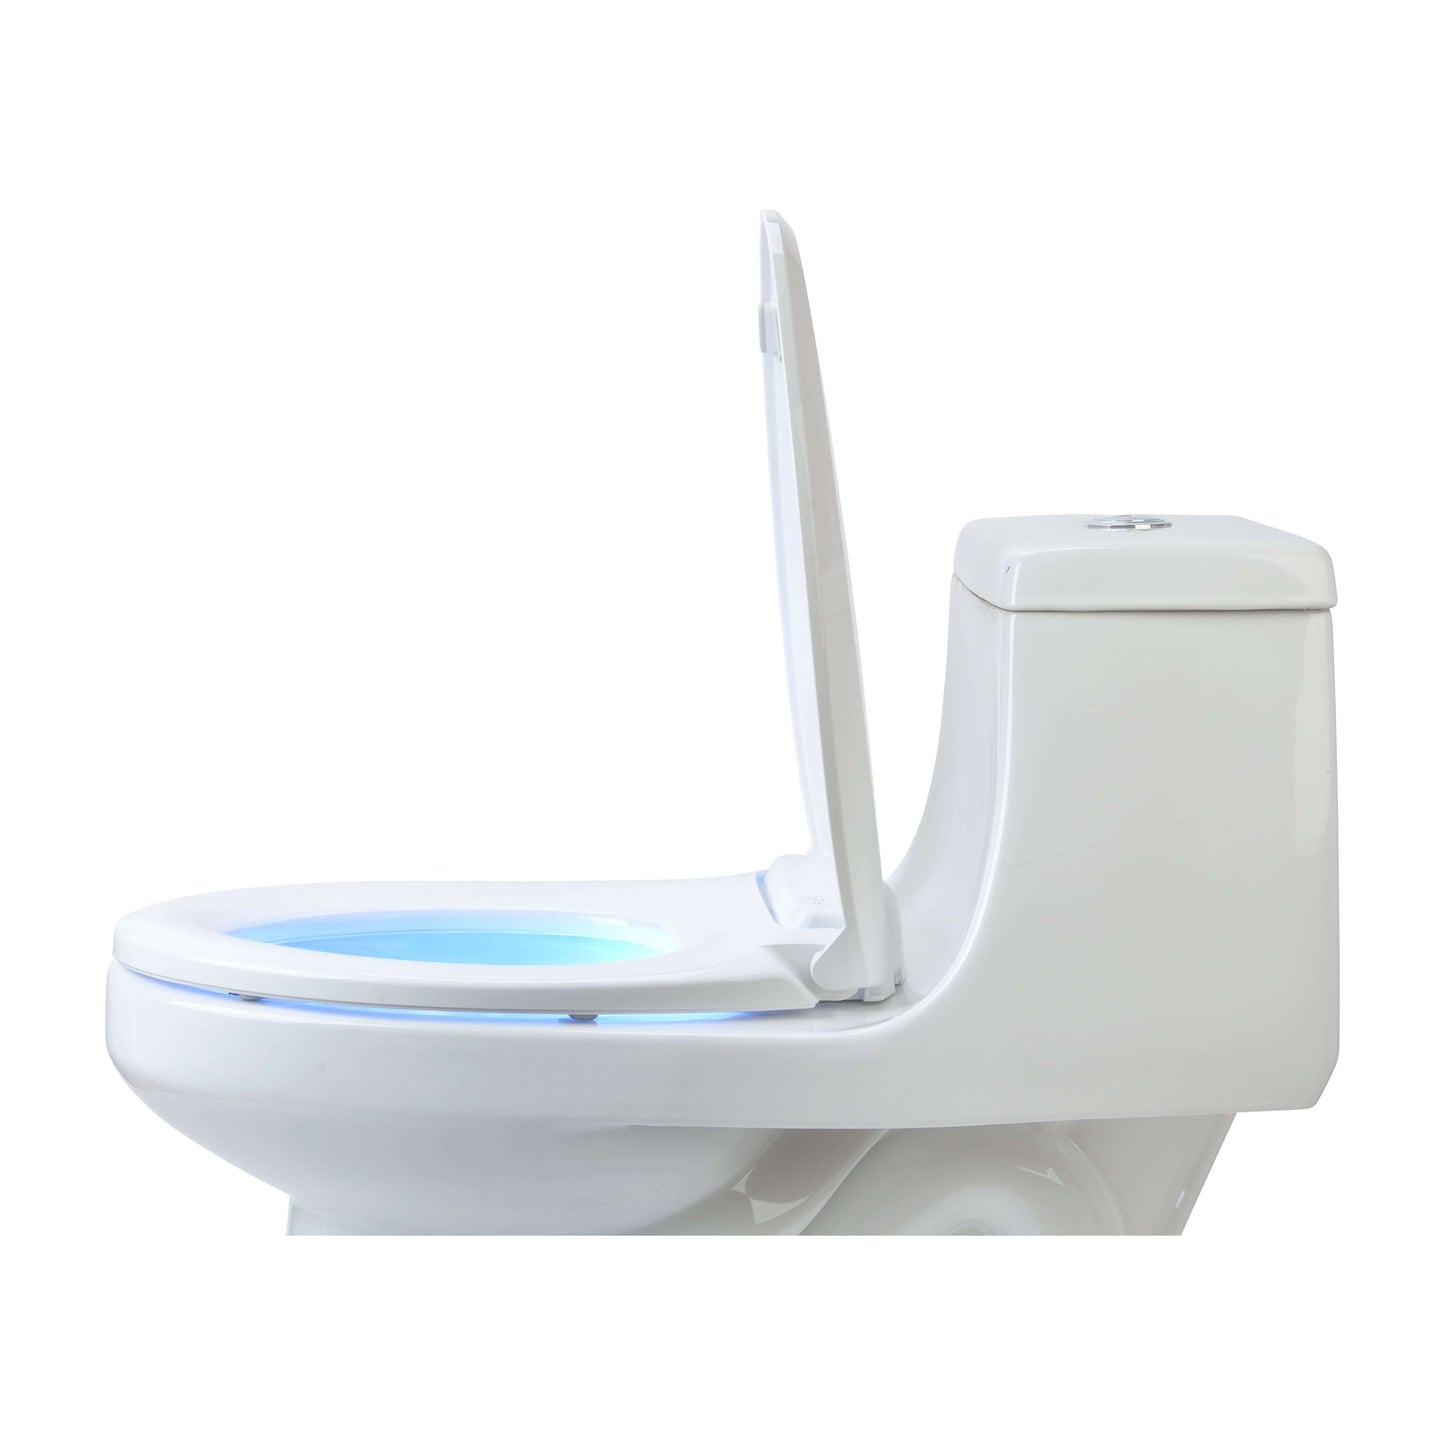 LumaWarm Heated Nightlight Toilet Seat - side view lid open attached to a toilet